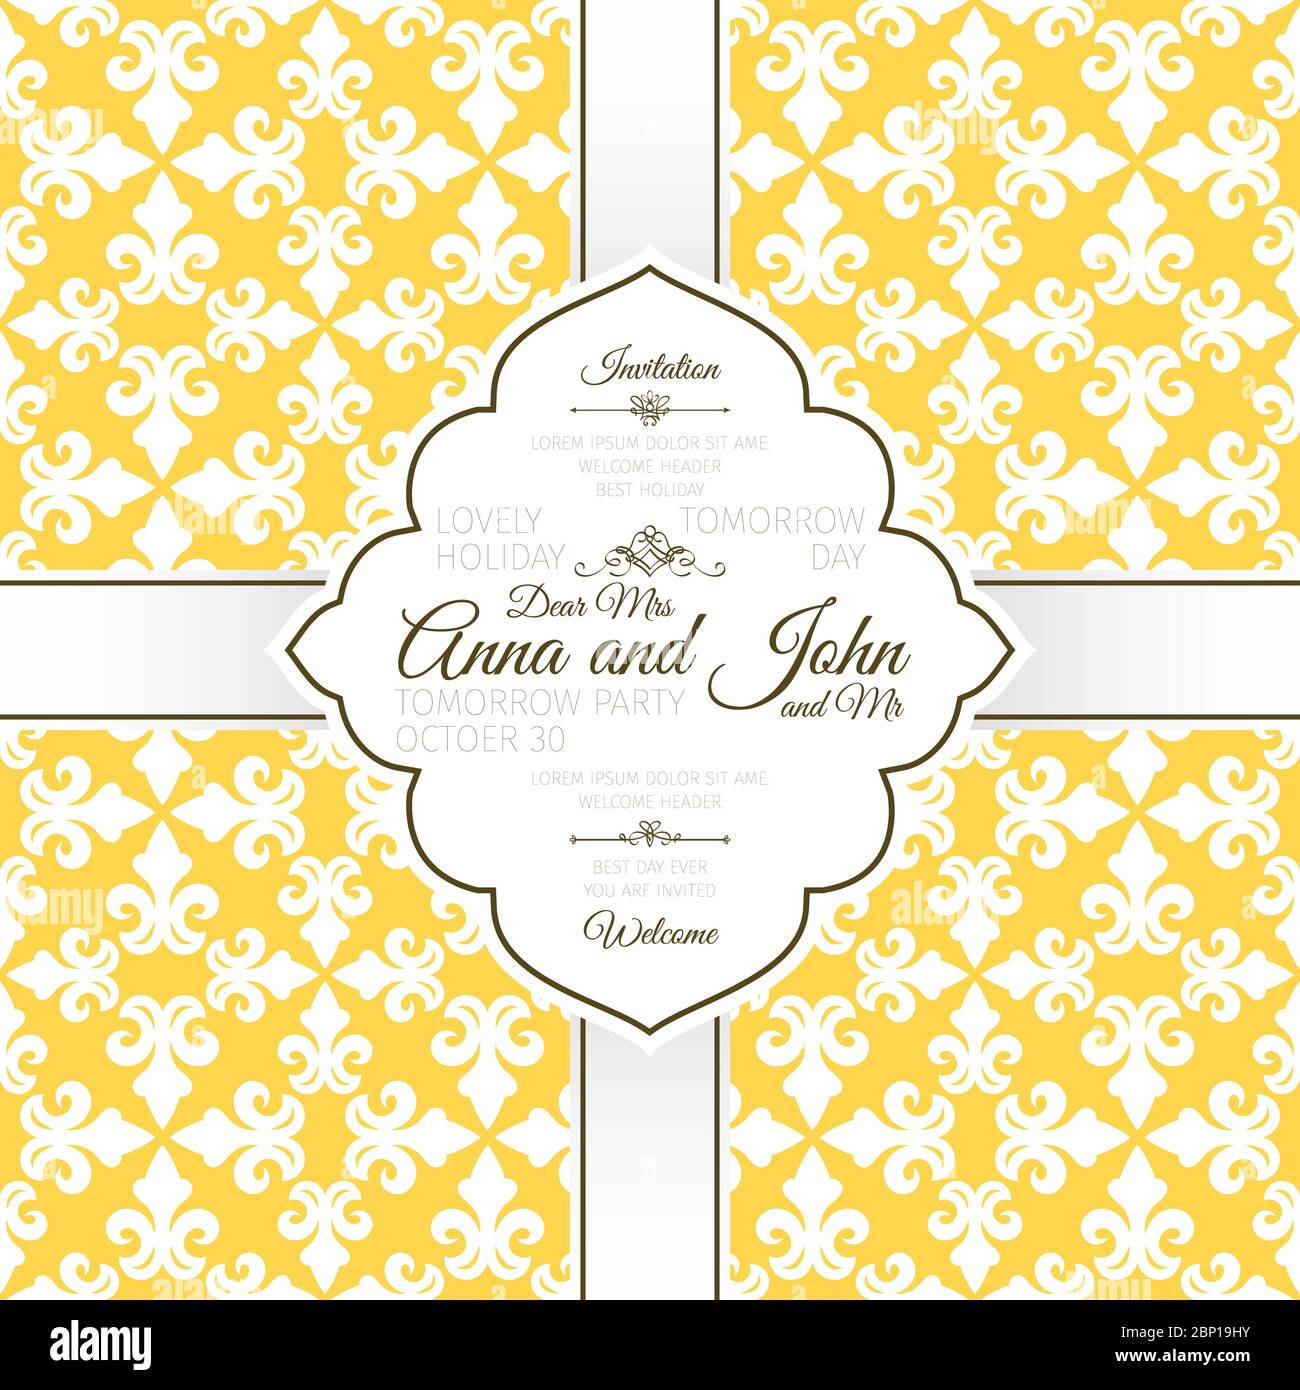 Invitation template card with french yellow pattern, vecctor illustration Stock Vector